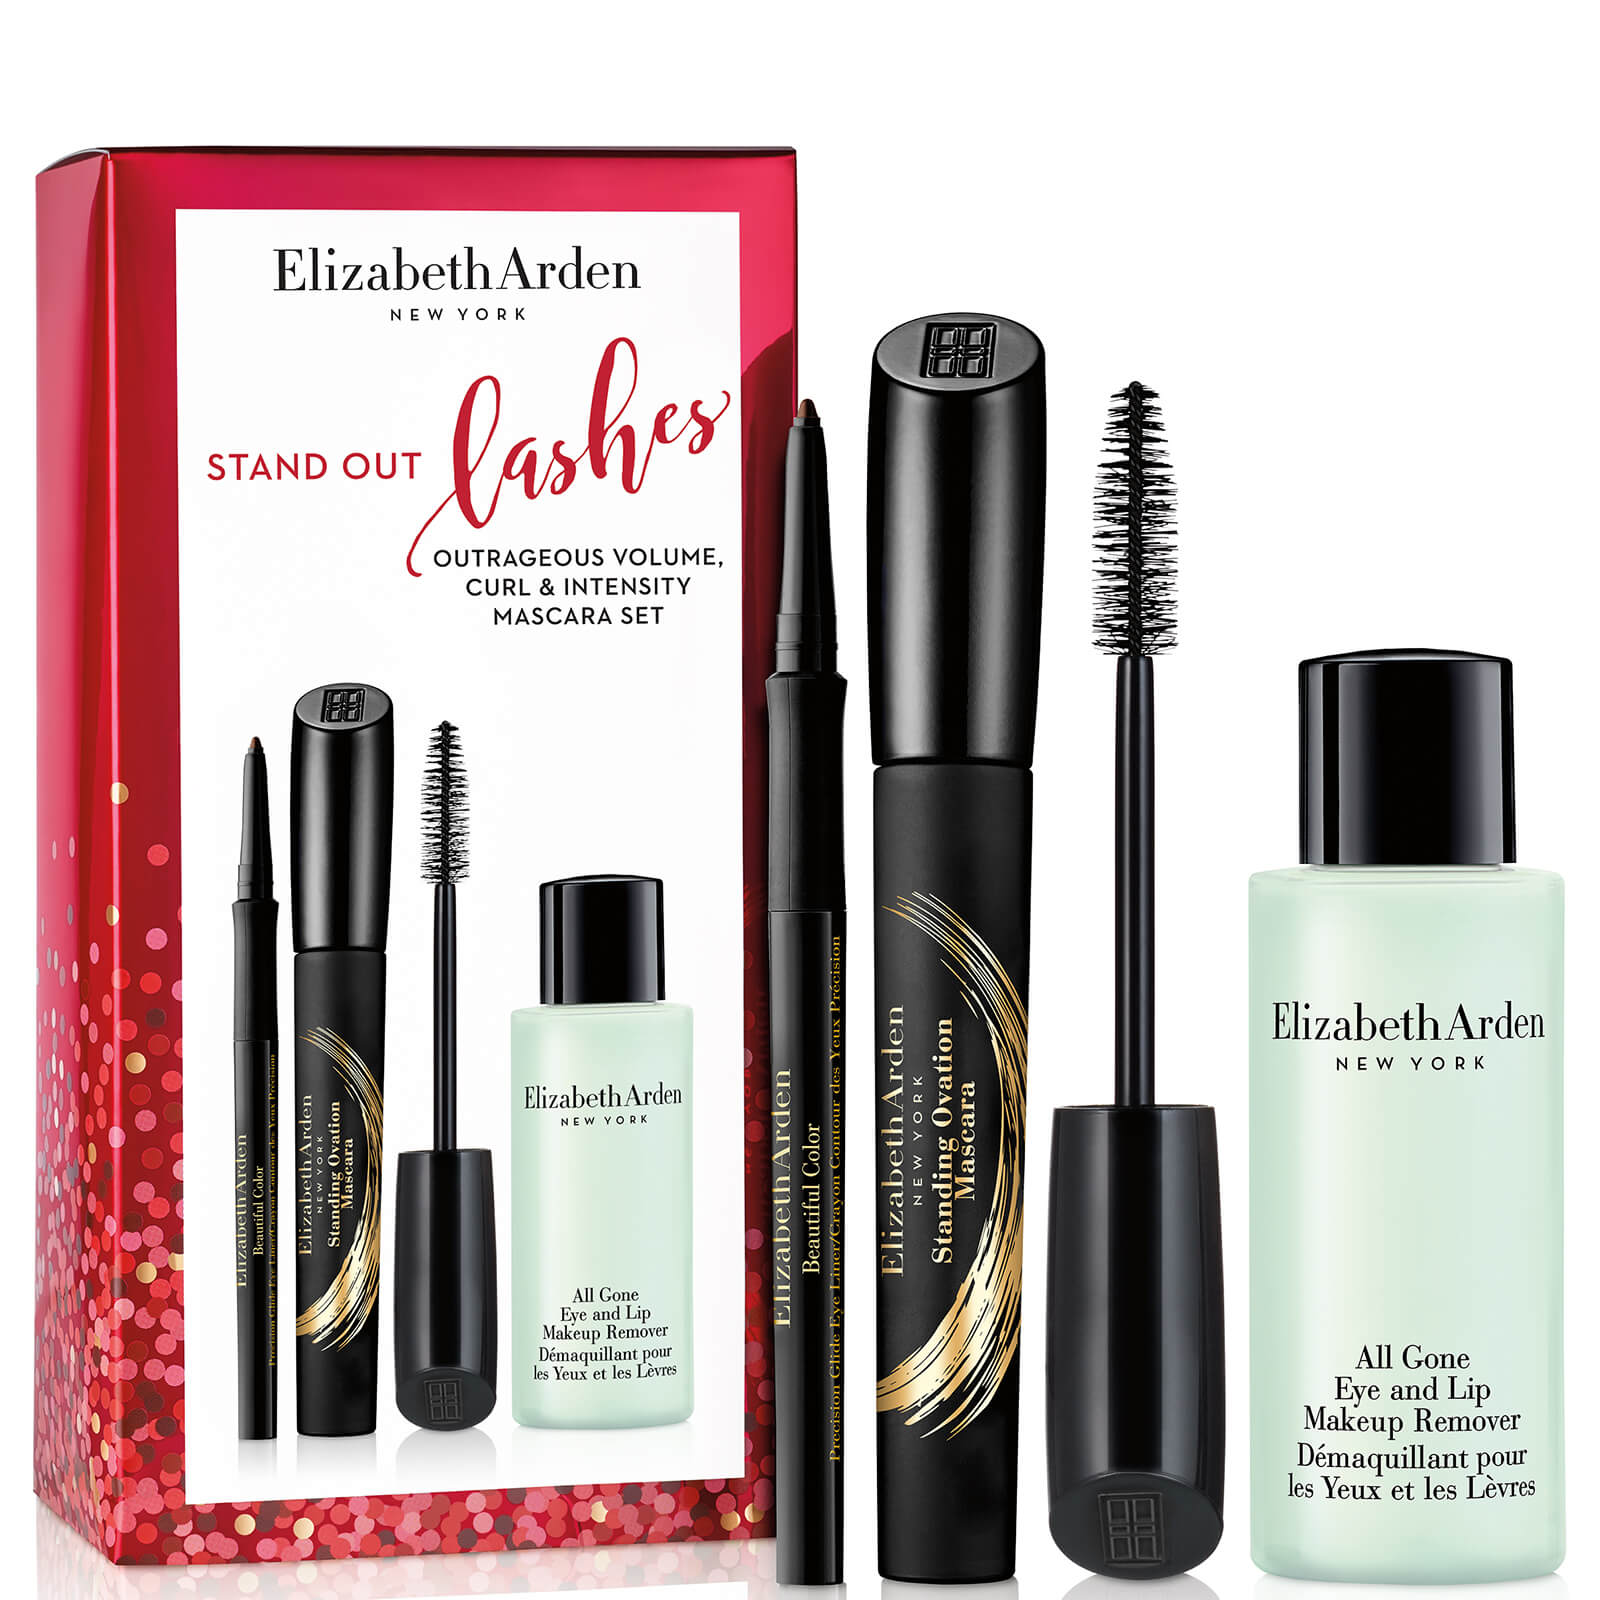 Elizabeth Arden Stand Out Lashes Outrageous Volume, Curl and Intensity Mascara Set